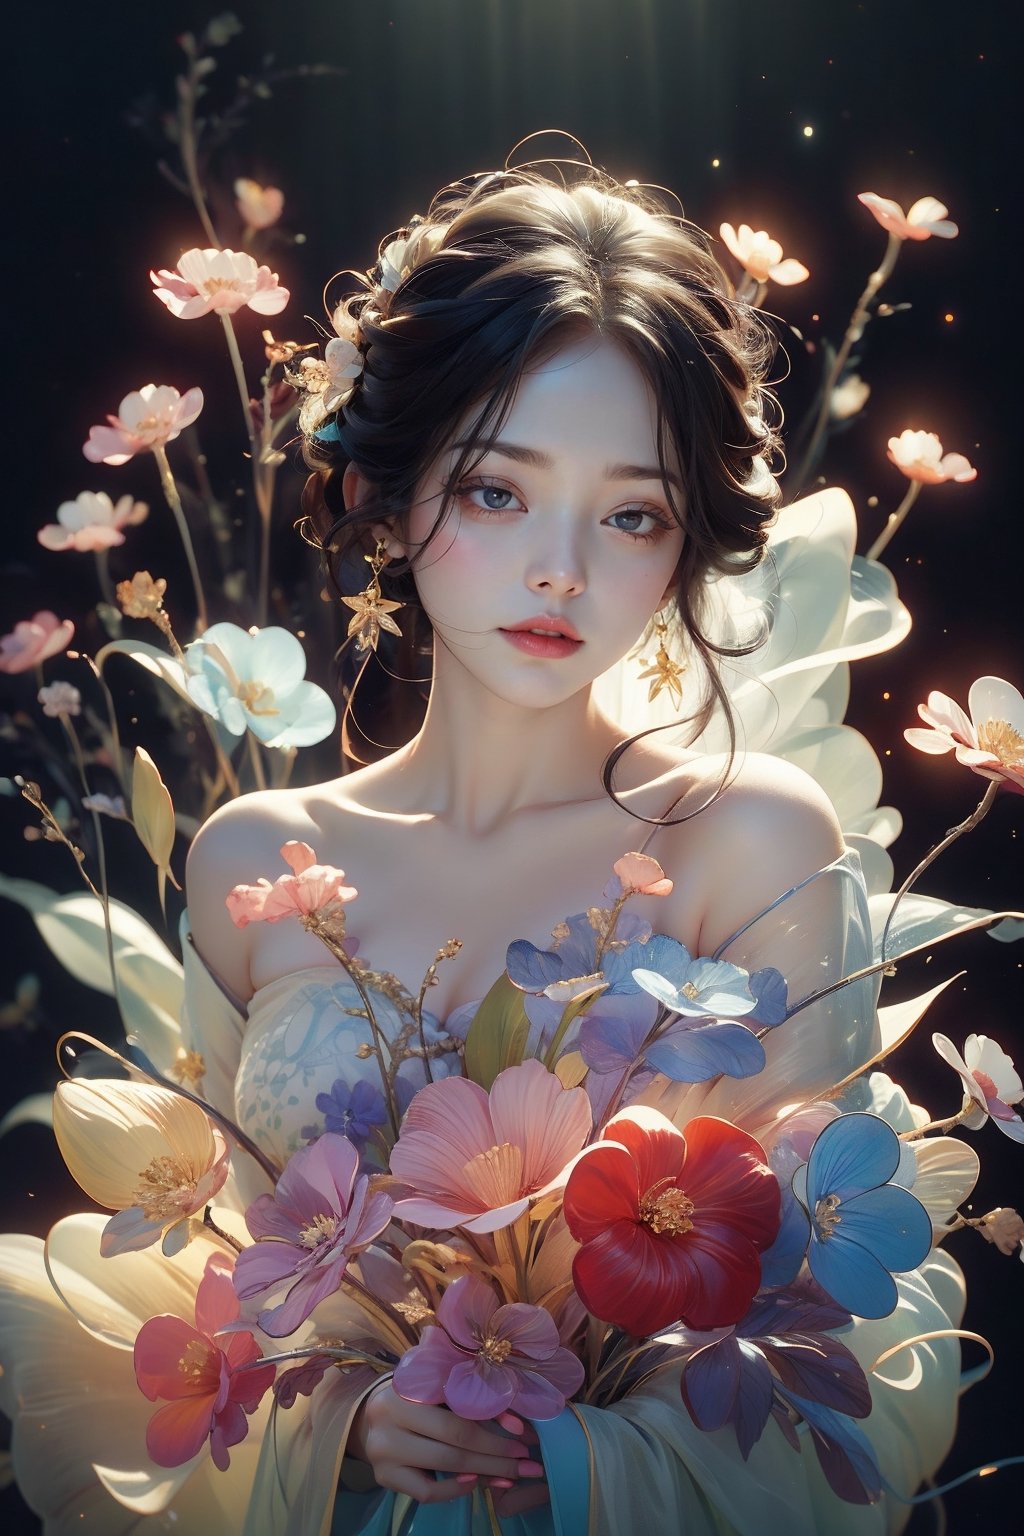 In a dreamy and ethereal setting, the woman is depicted floating in a cloud of mist and soft light. Her body is surrounded by delicate flowers that seem to bloom from her very essence, symbolizing the beauty and vitality of femininity. The colors used are pastel and muted, creating a serene and tranquil atmosphere. The composition is organic and flowing, with the woman’s body forming graceful curves that harmonize with the natural elements around her. The overall mood is one of enchantment and mystique, evoking a sense of wonder and reverence for the feminine form.,Transparent Glass Flowers